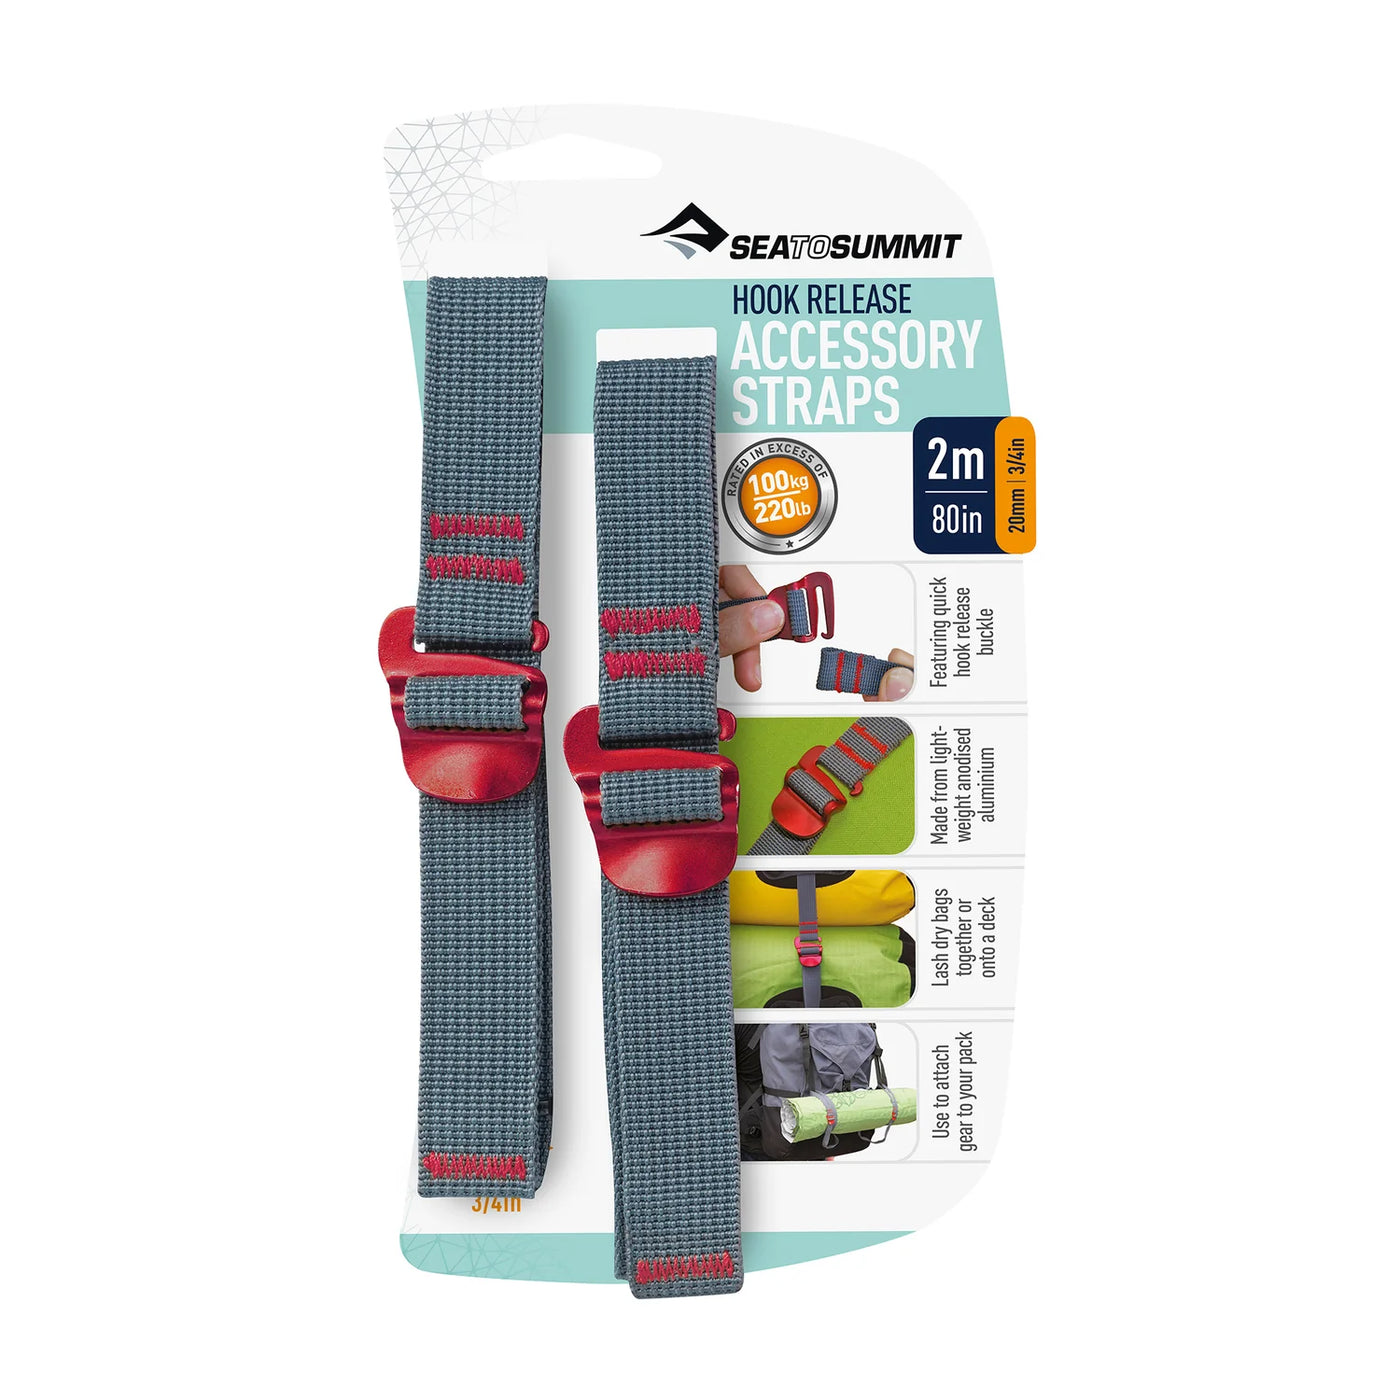 Sea to Summit Accessory Straps with Hook Release 20mm